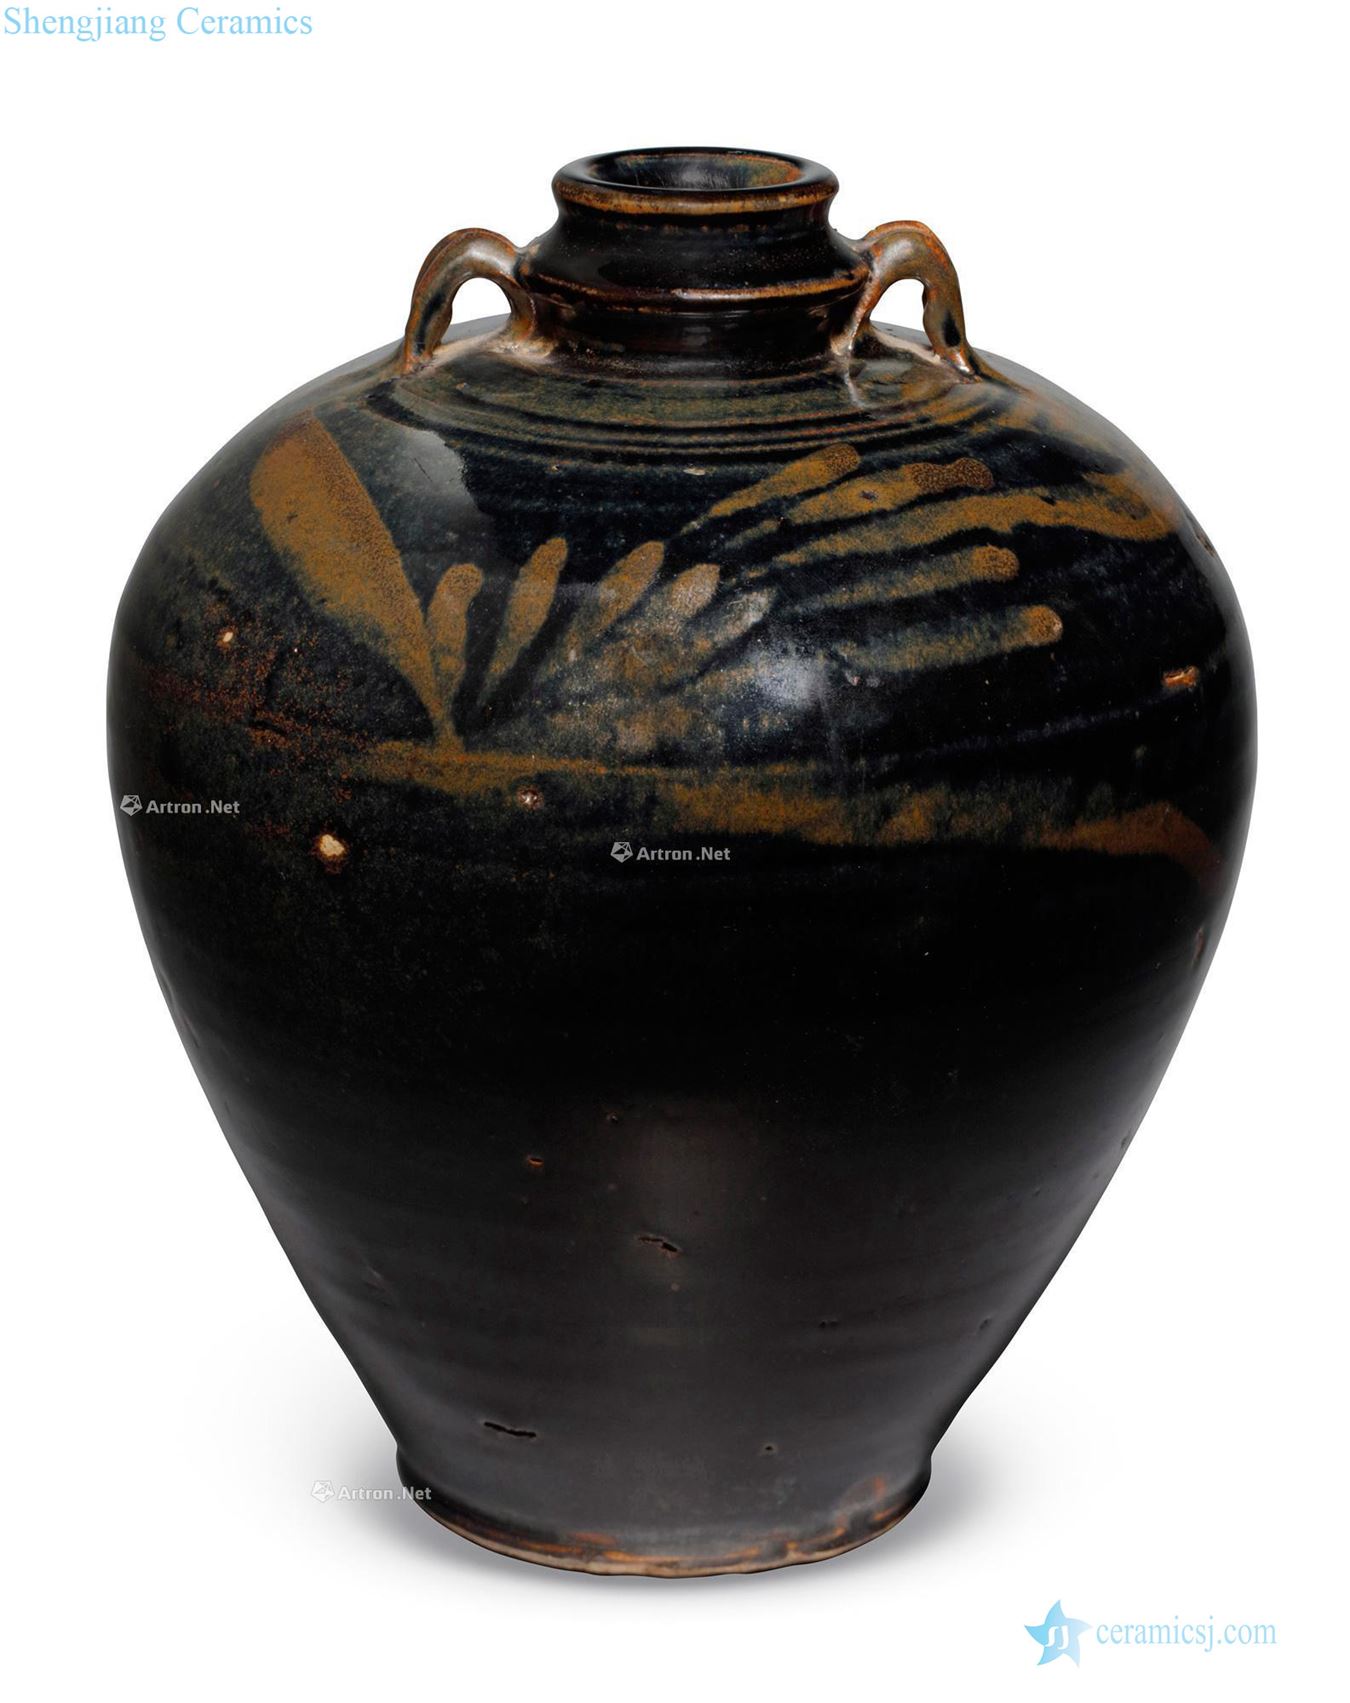 Gold/yuan. In the 13th century The black glaze brown pattern double small mouth bottles